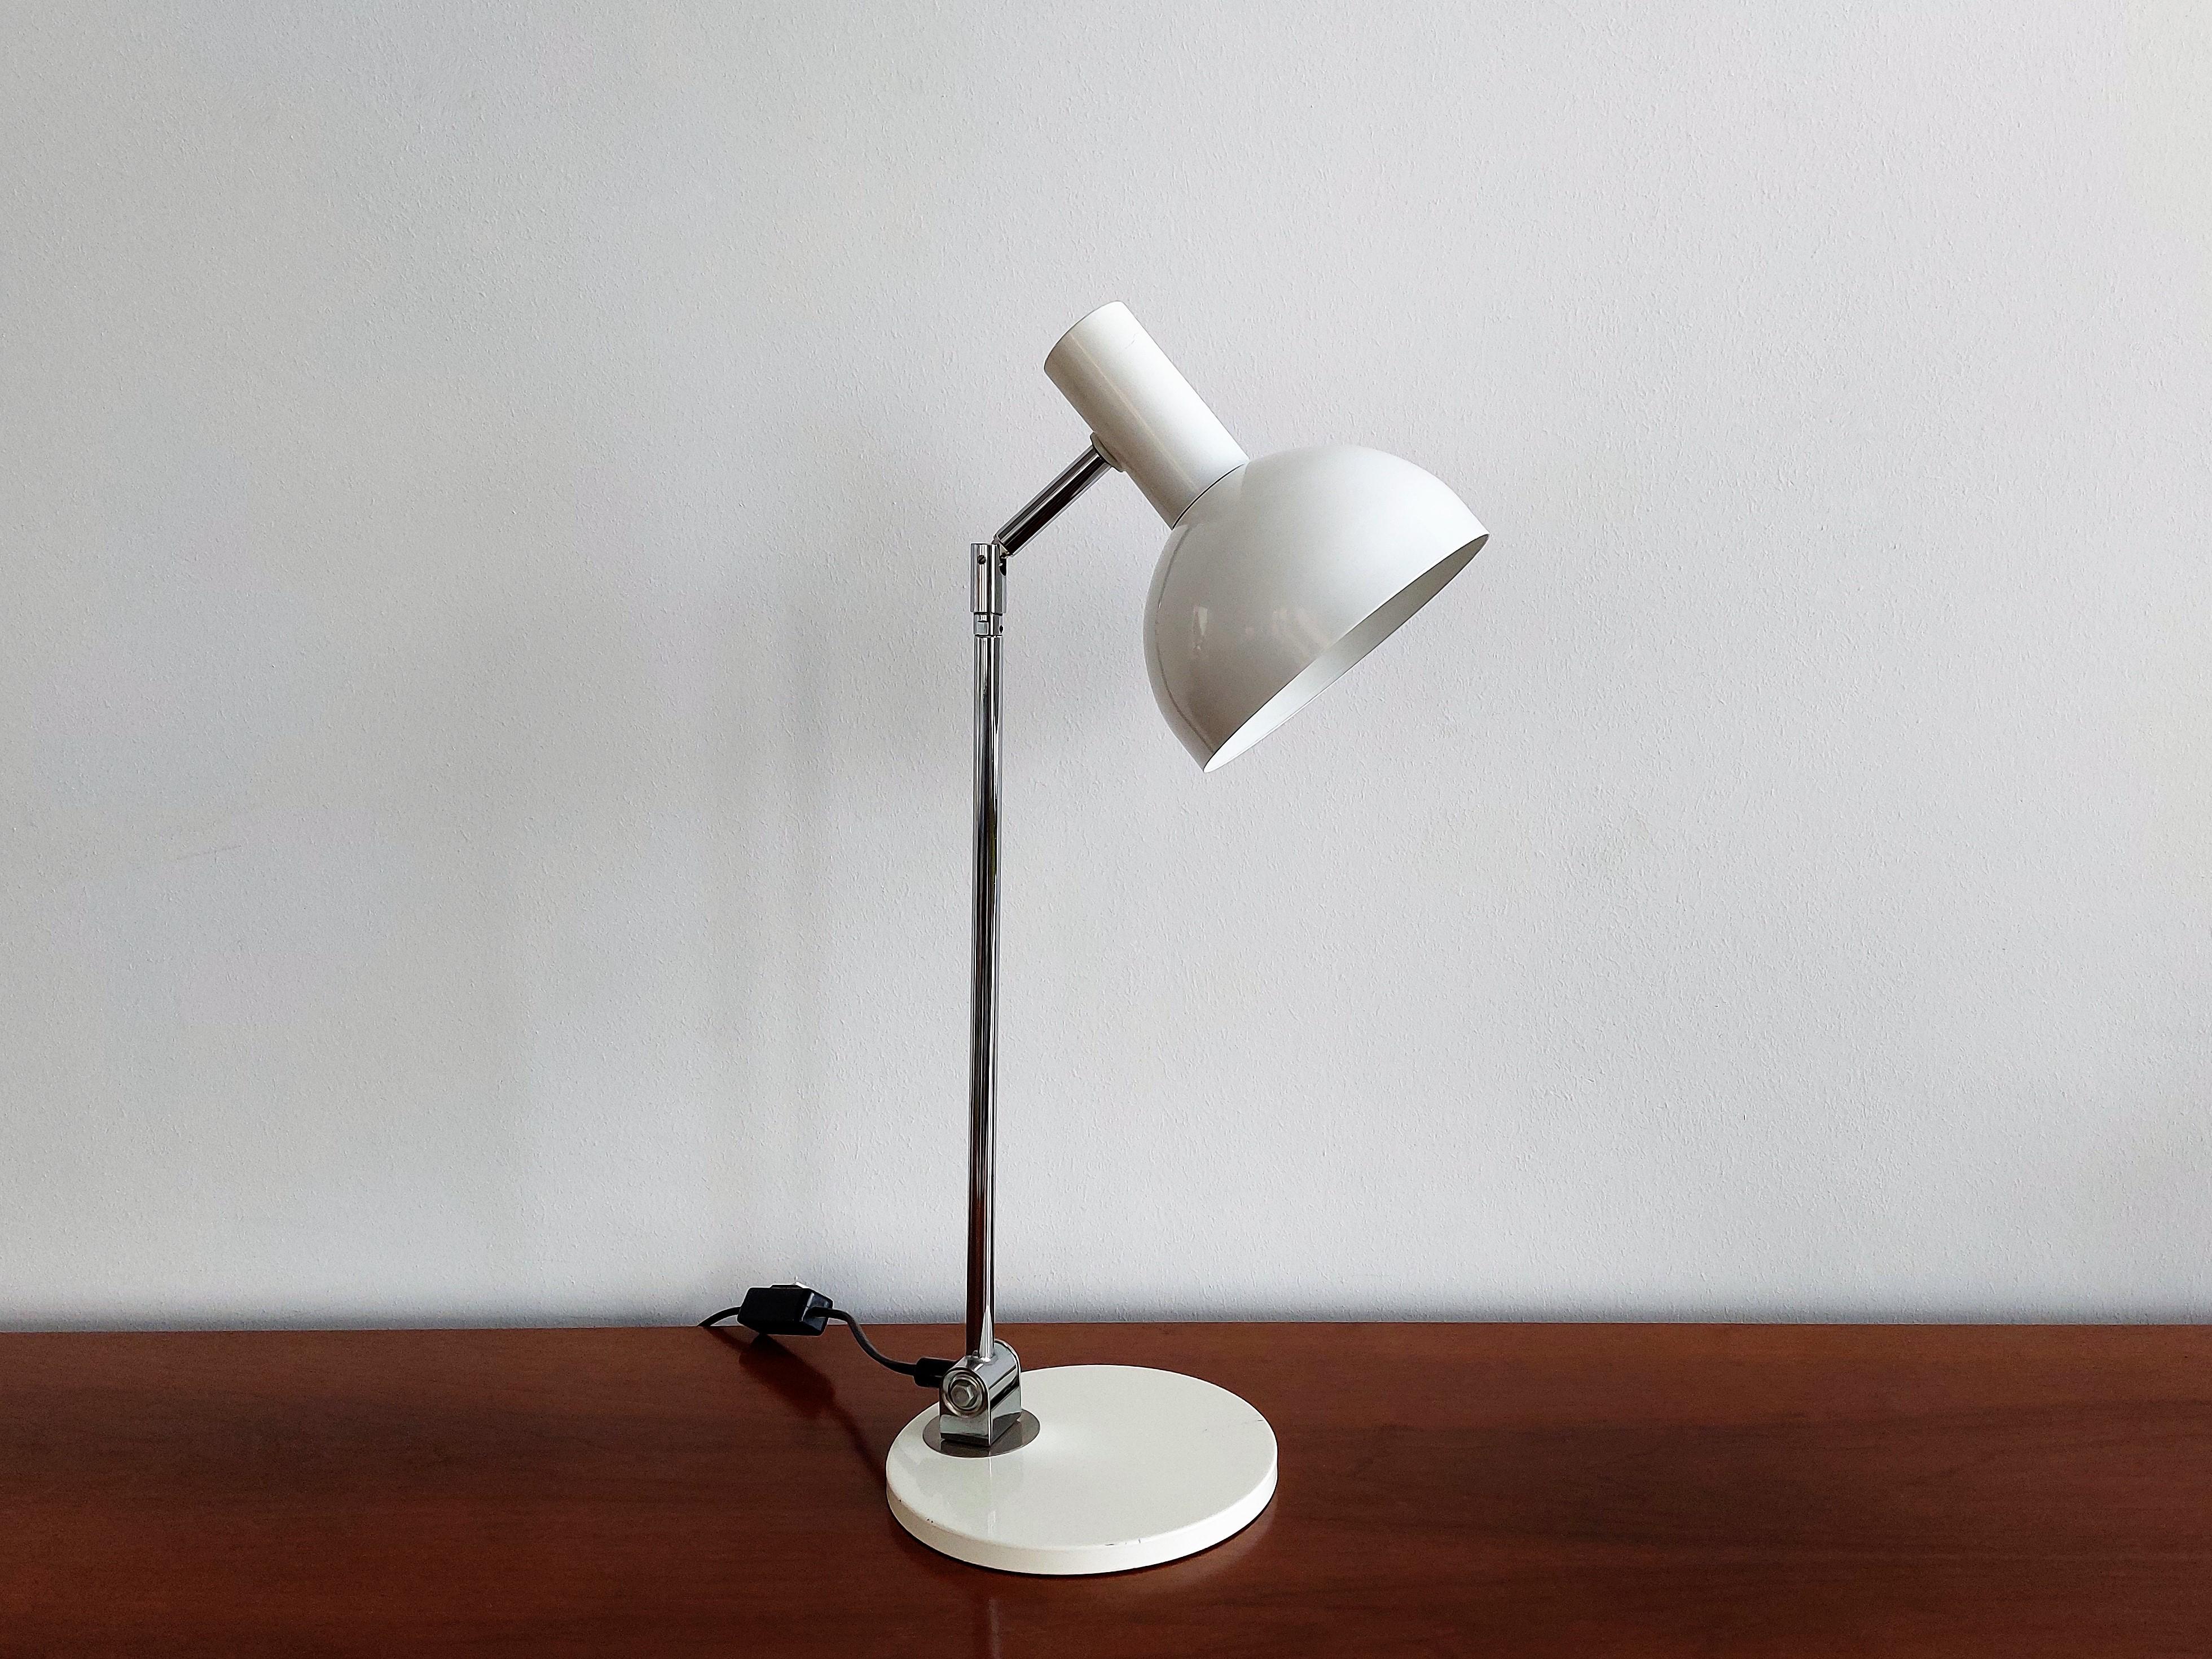 This table lamp is very much in the style of the 'ball in socket' floor lamp by H. Busquet for Hala Zeist and also a desk lamp from Raak. It has a round white base and shade with a chromed metal adjustable arm in between. The lamp is perfect as a